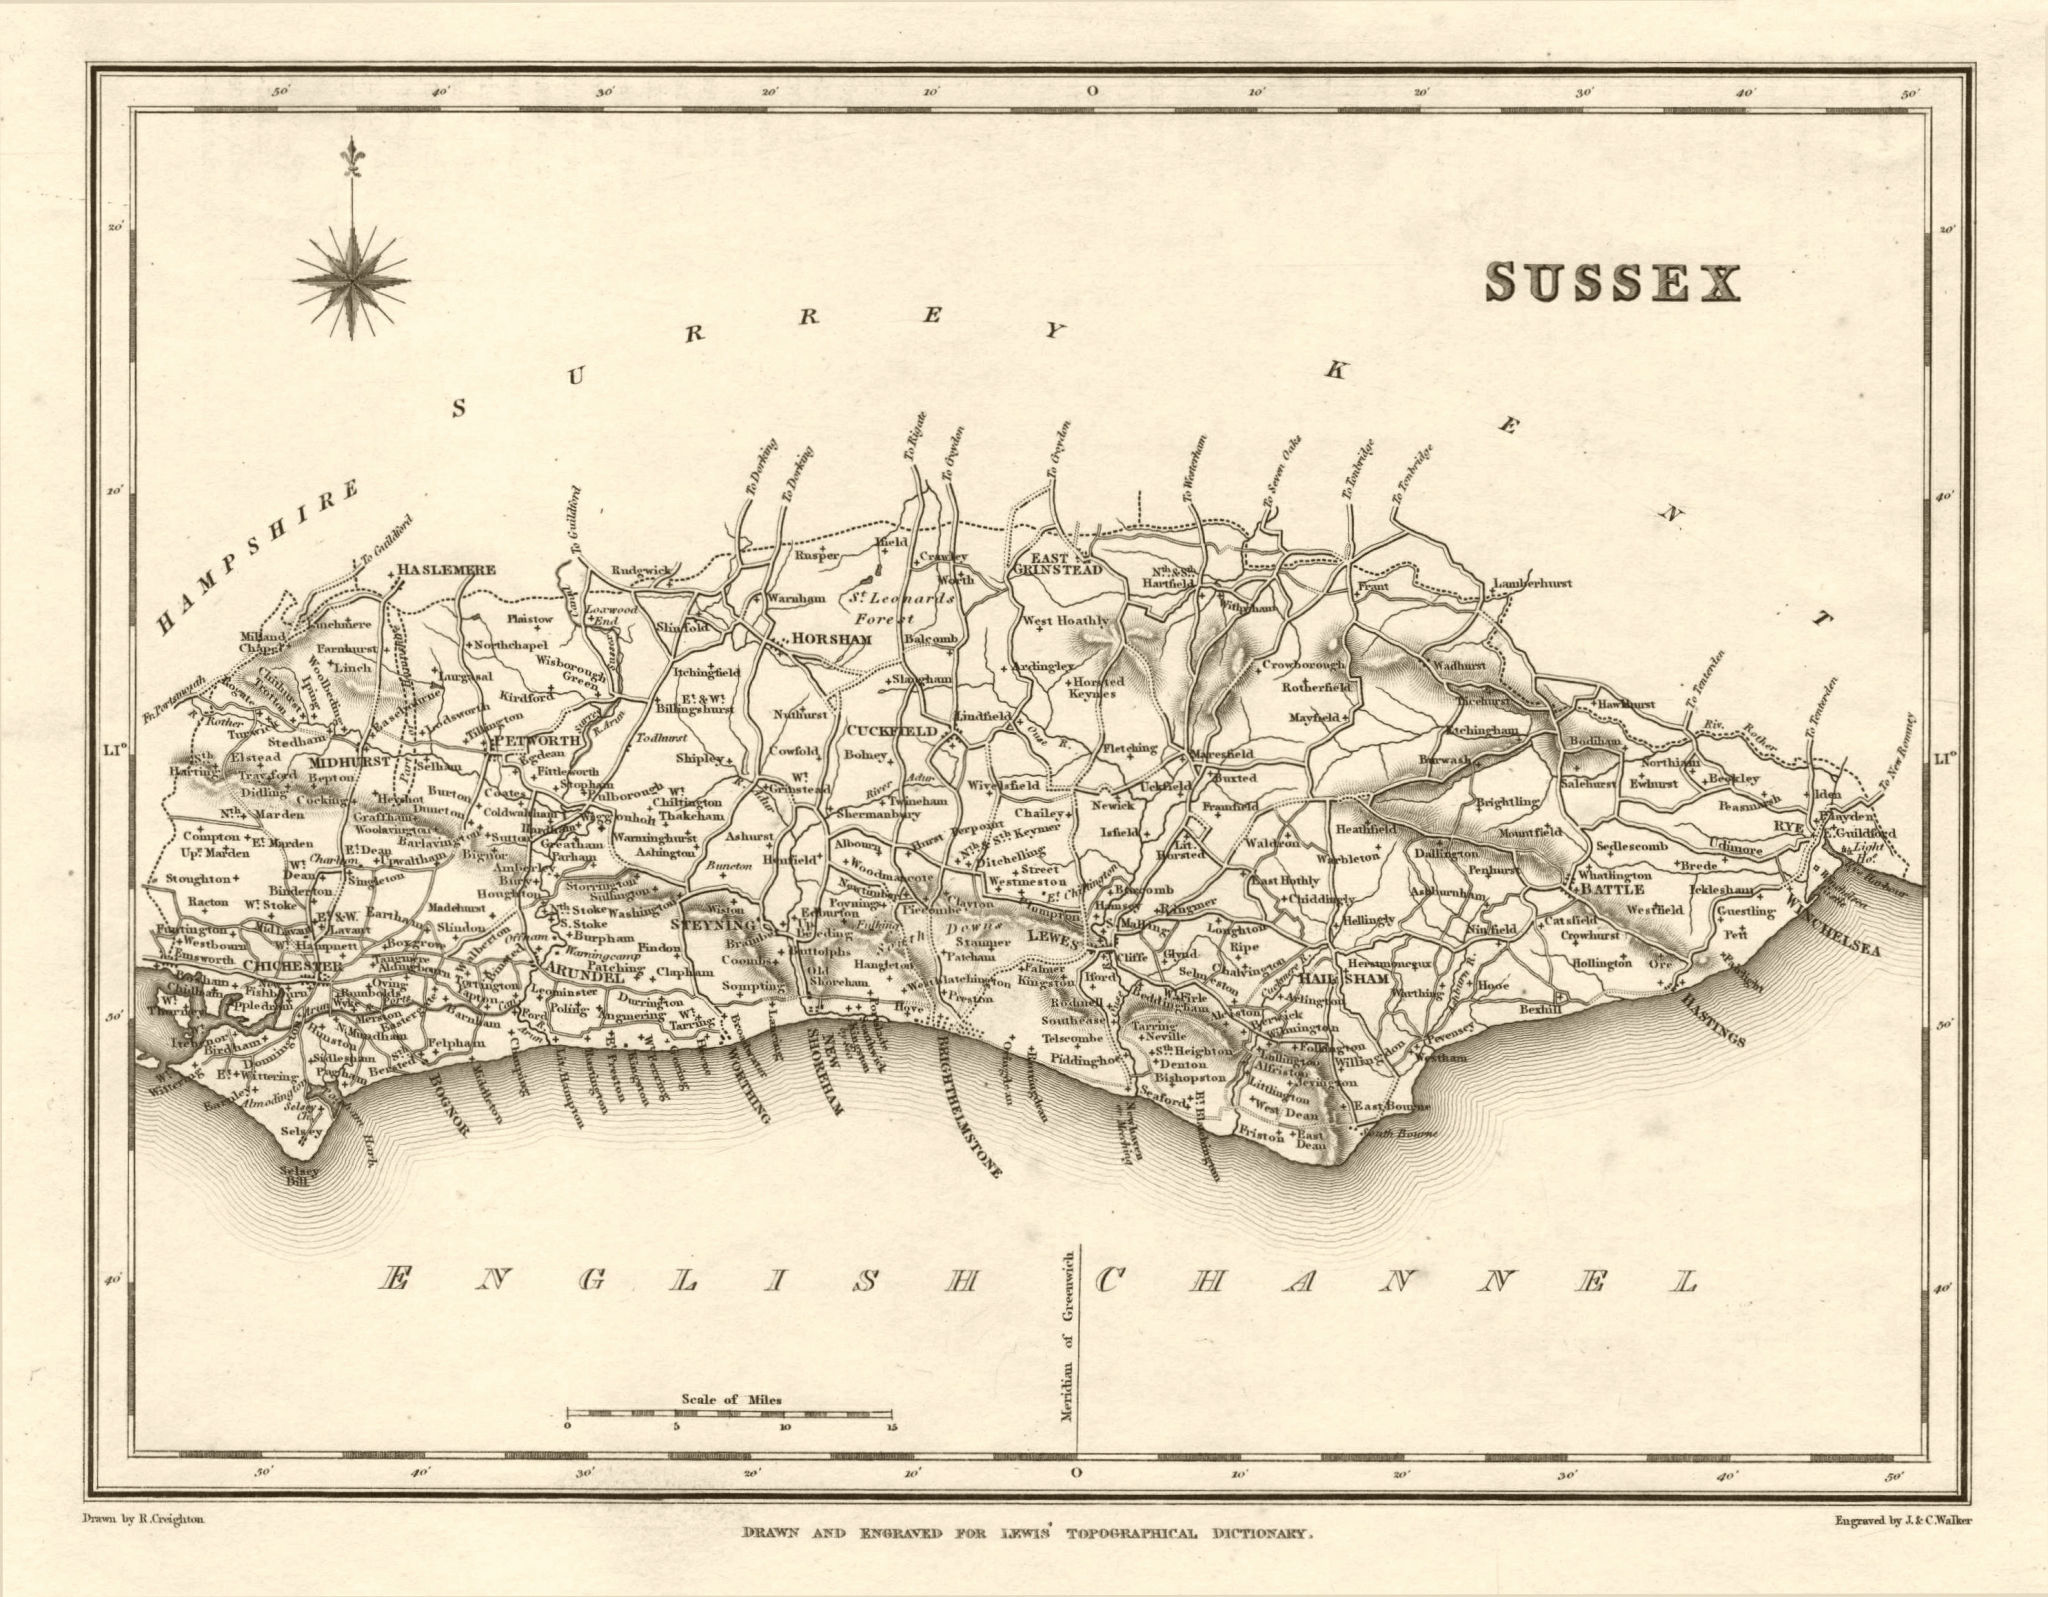 Associate Product Antique county map of SUSSEX by Walker & Creighton for Lewis c1840 old